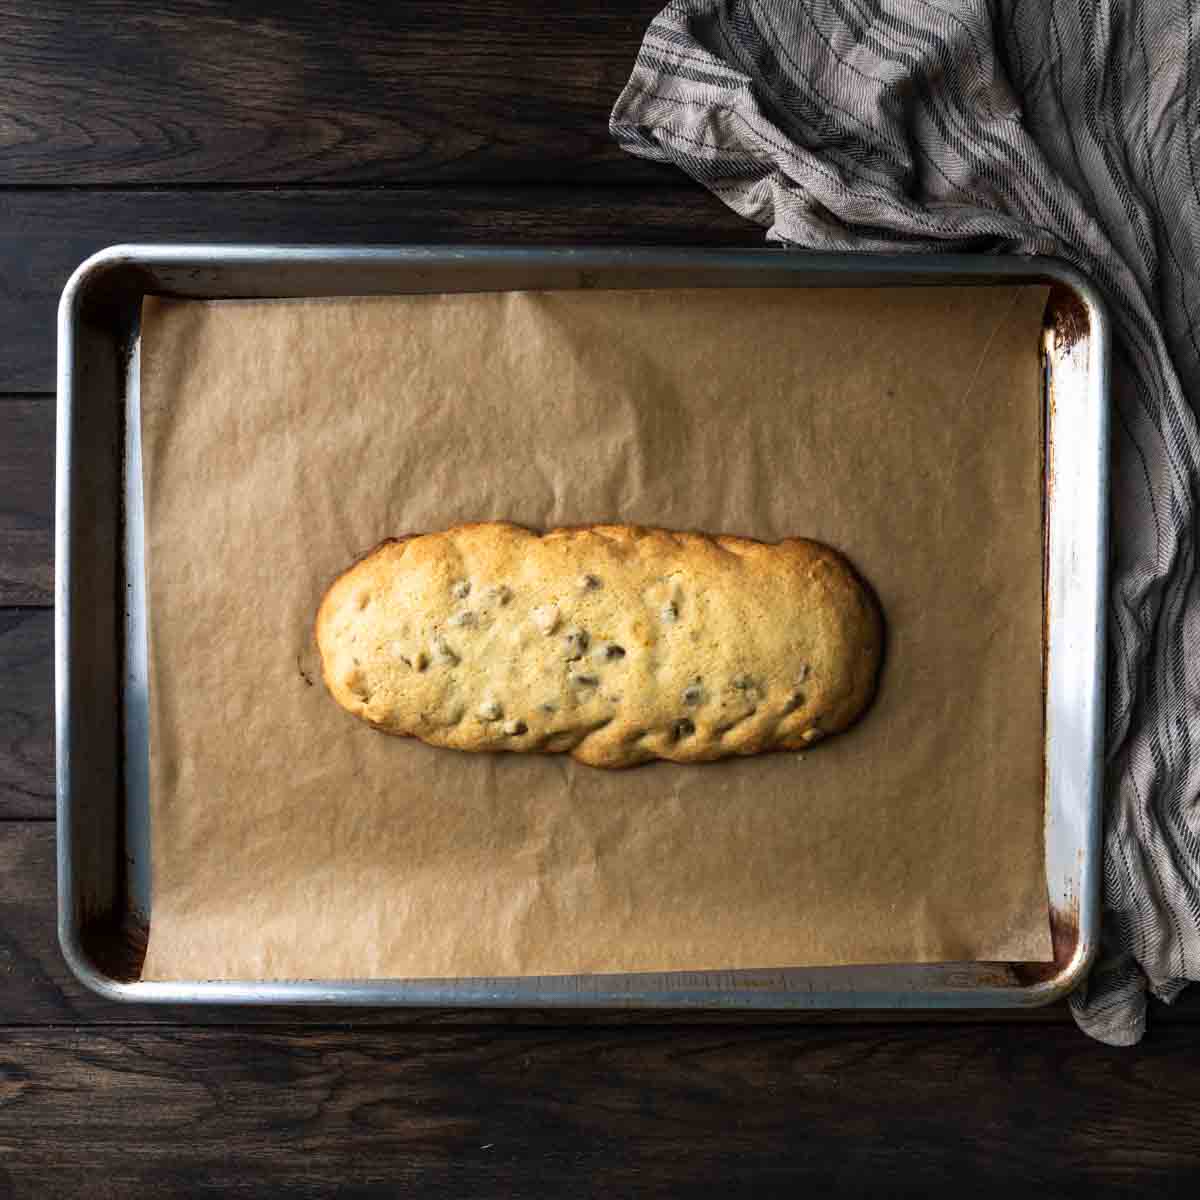 The lightly golden baked log of biscotti